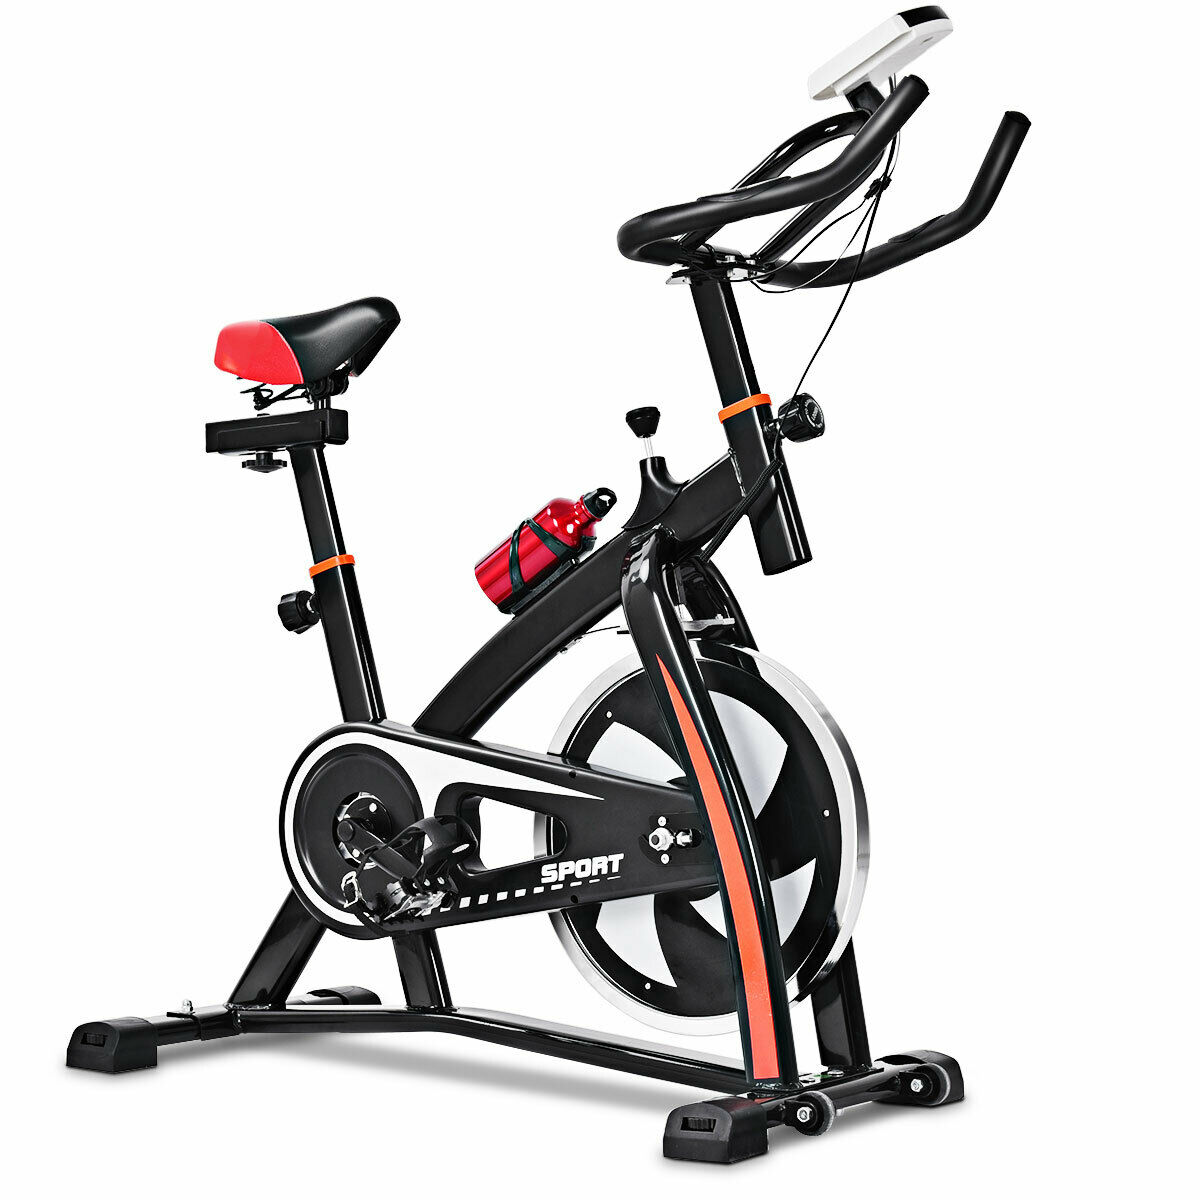 Costway Exercise Bicycle Indoor Bike Cycling Cardio Adjustable Gym Workout Fitness Home - image 1 of 9